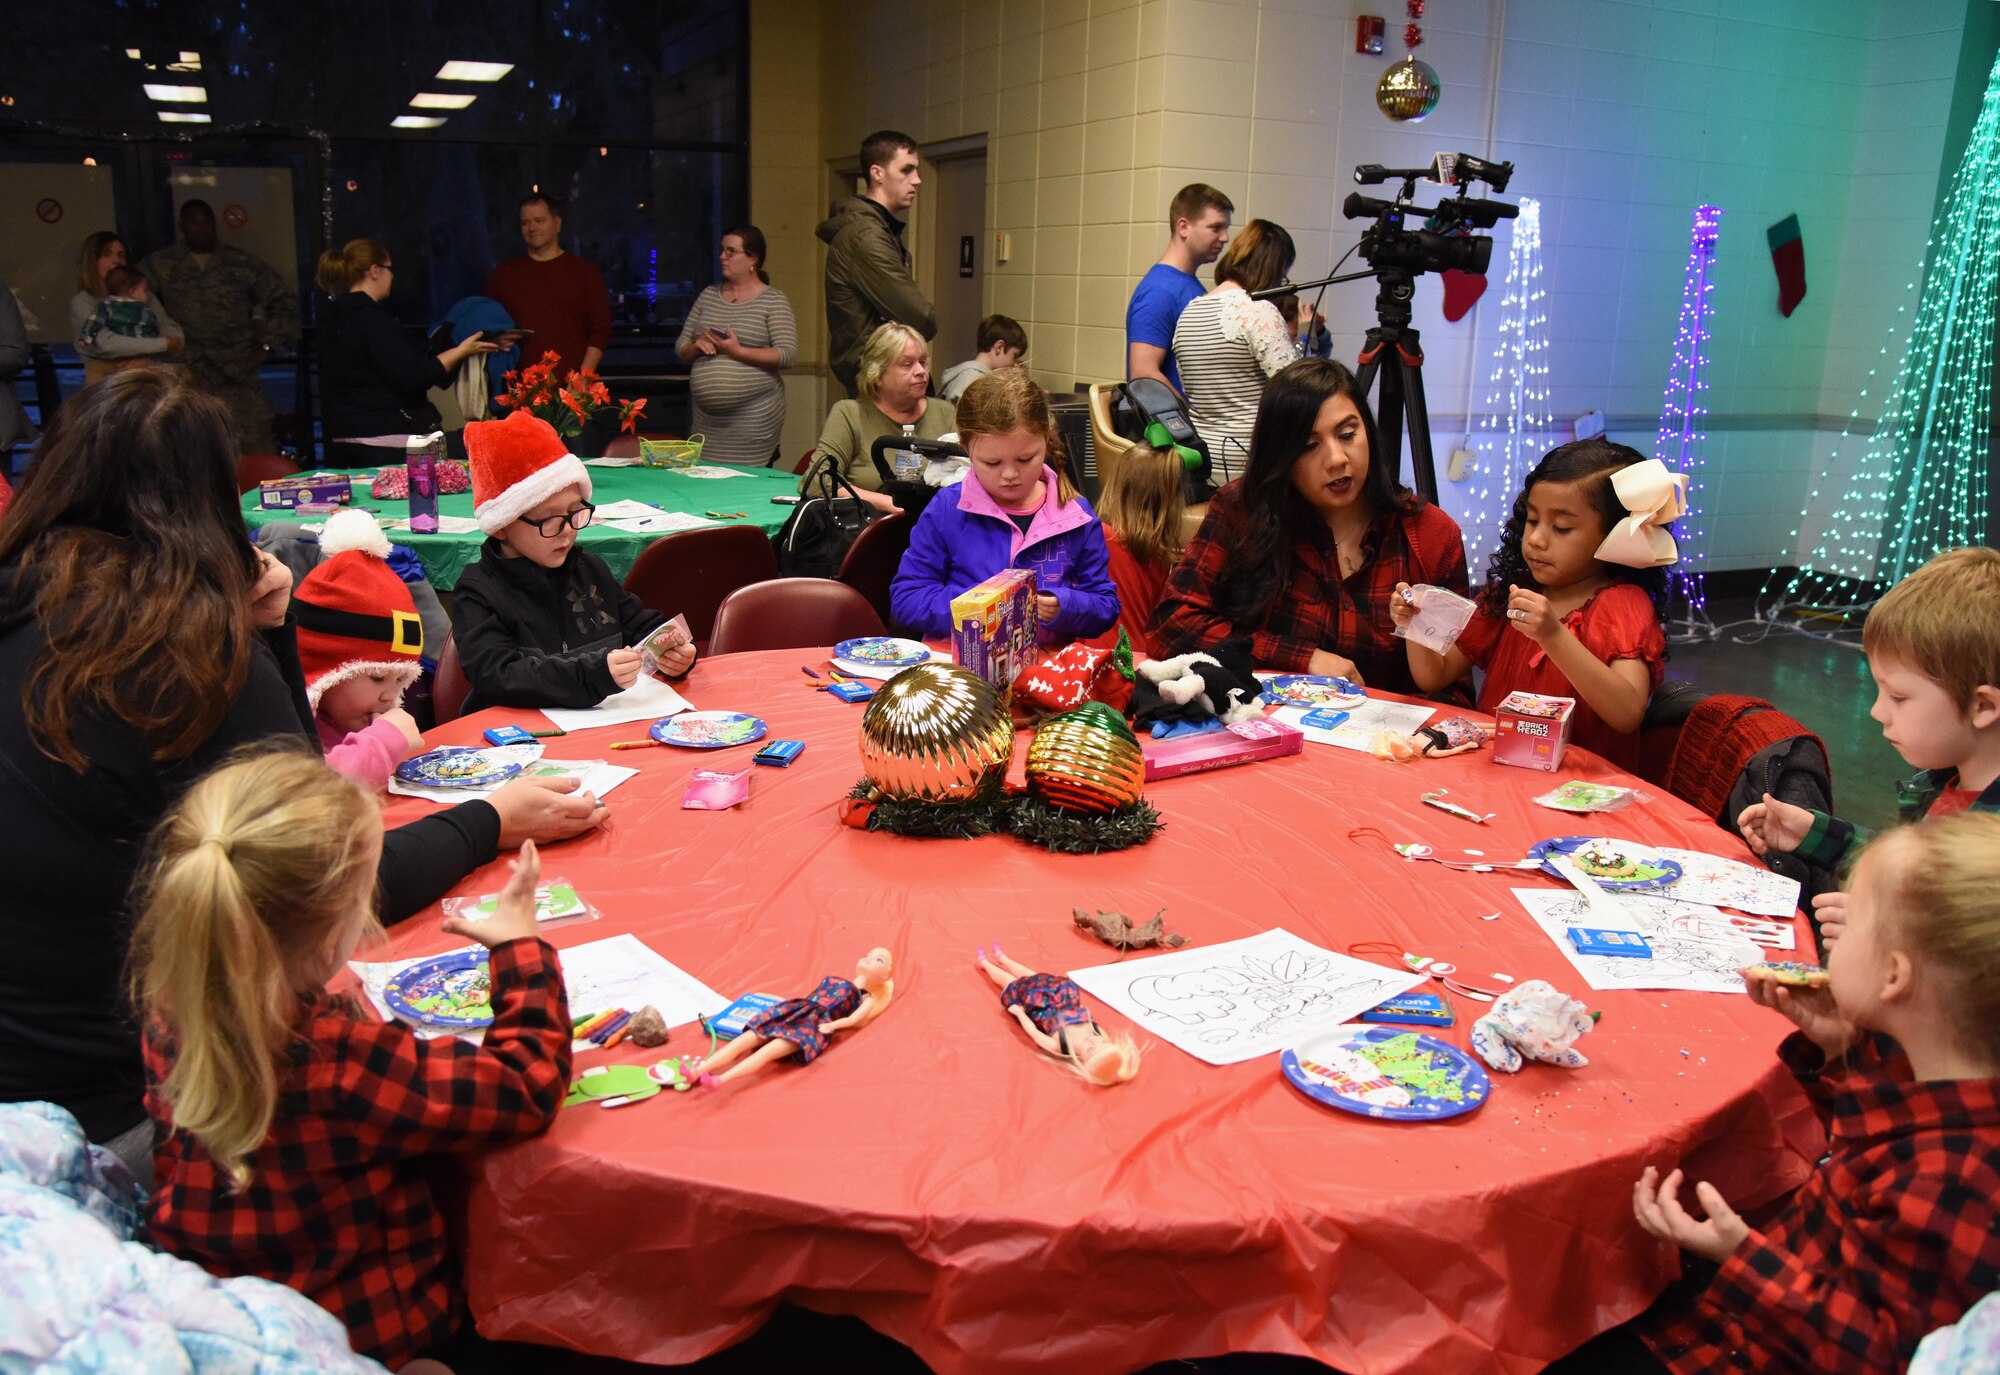 Keesler personnel attends Christmas in the Park at Keesler Air Force Base, Mississippi, Dec. 6, 2018. The event hosted by Outdoor Recreation included cookie and ornament decorating, games and visits with Santa. (U.S. Air Force photo by Kemberly Groue)